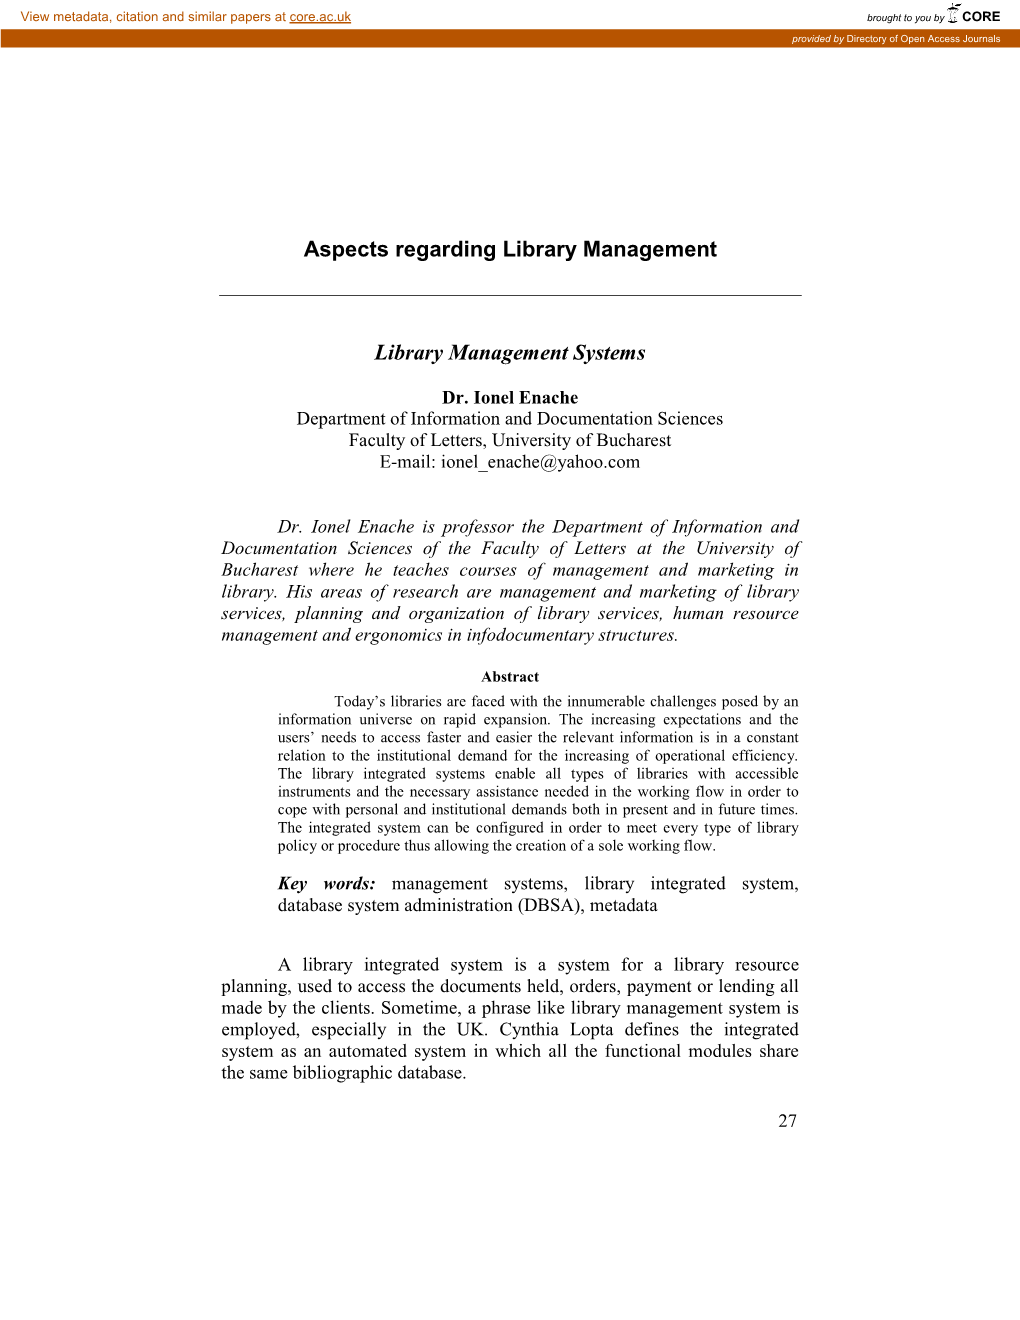 Library Management Systems